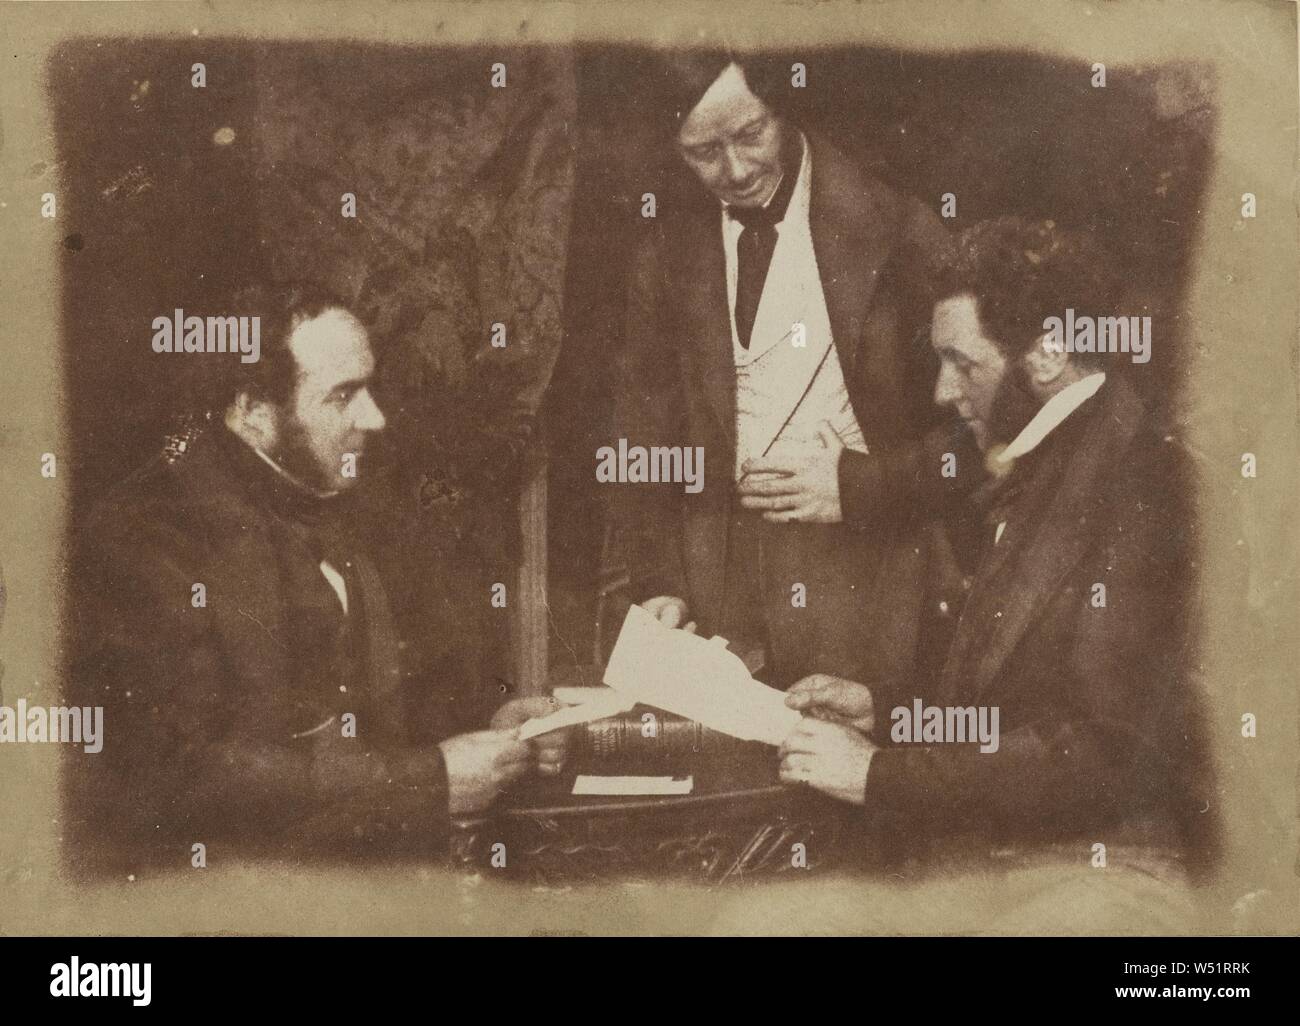 D.W.Treyevant, William Napier and John Richardson, Hill & Adamson (Scottish, active 1843 - 1848), 1843–1848, Salted paper print from a paper negative, 14.4 × 20 cm (5 11/16 × 7 7/8 in Stock Photo